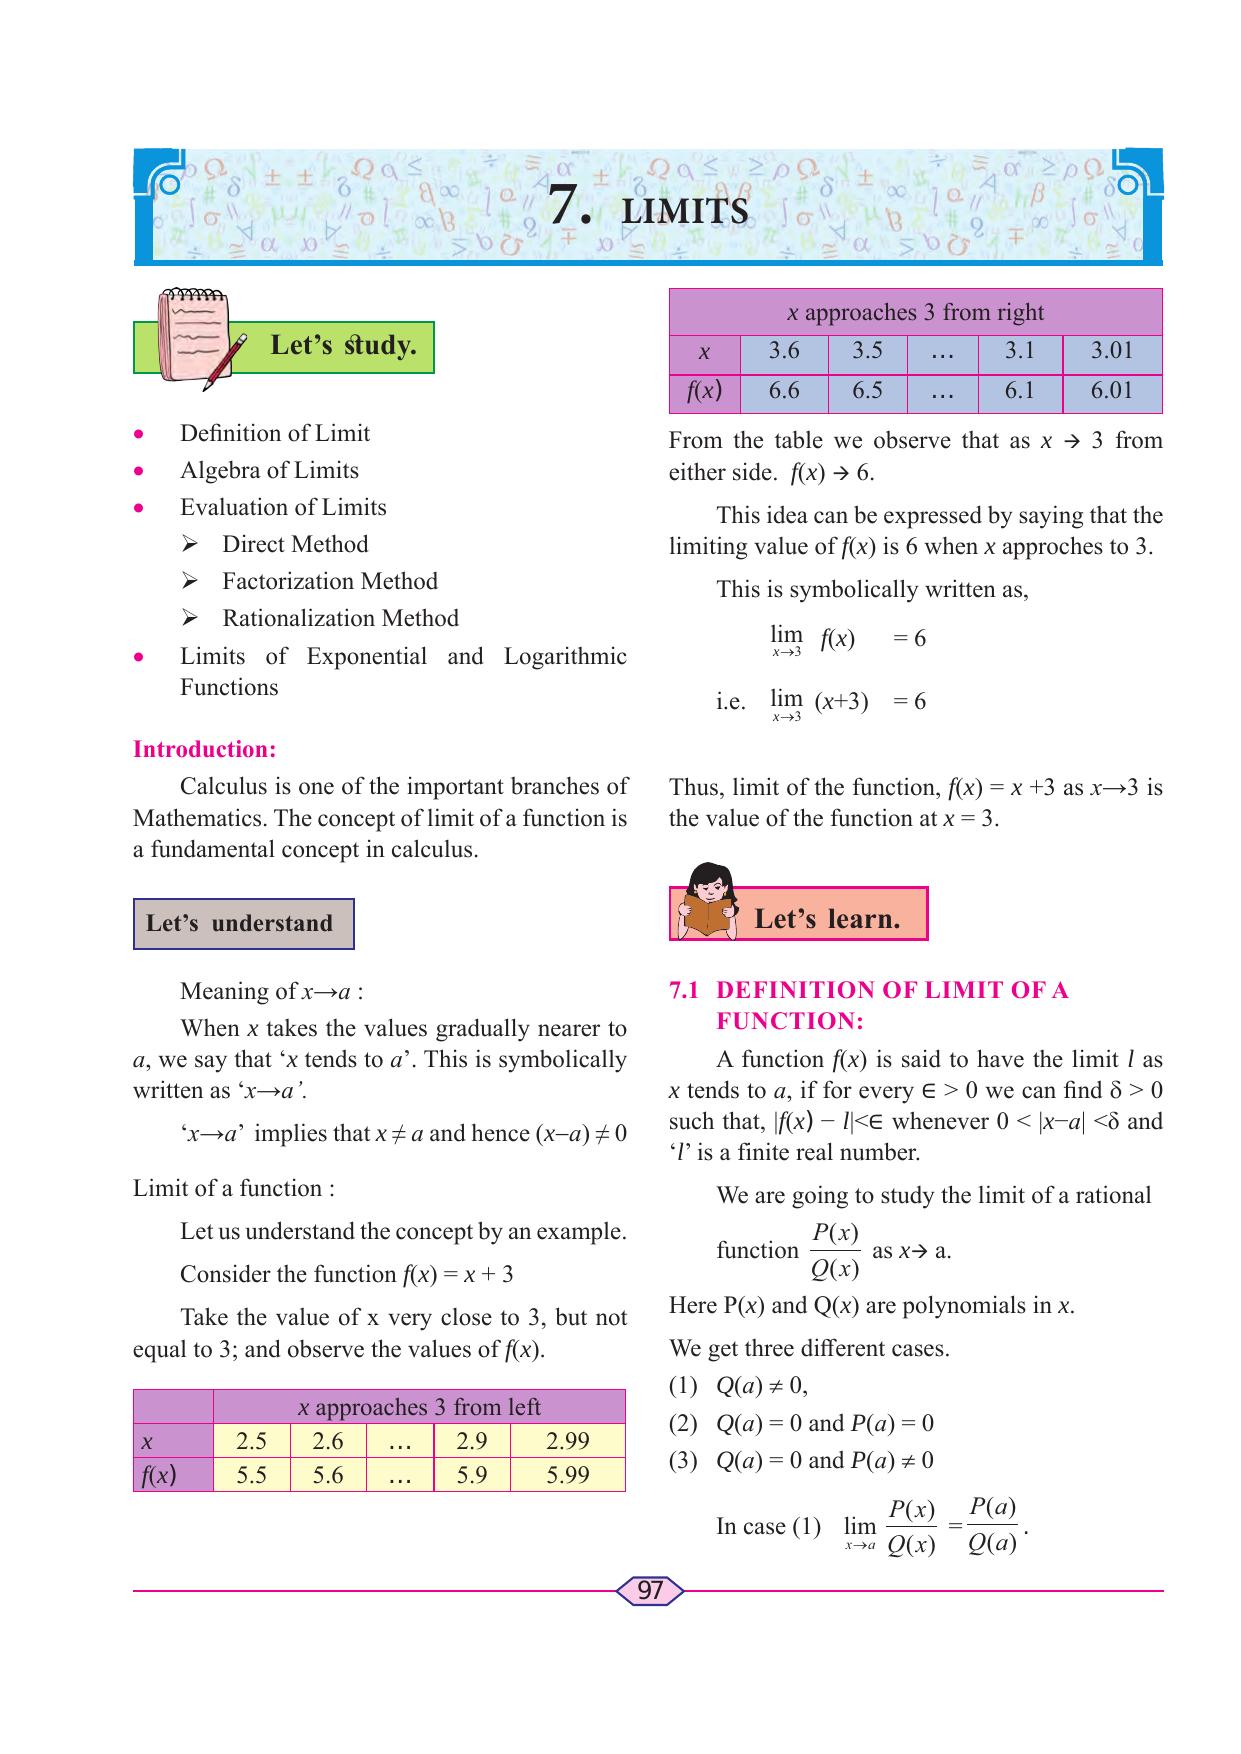 Maharashtra Board Class 11 Maths (Commerce) (Part 1) Textbook - Page 107